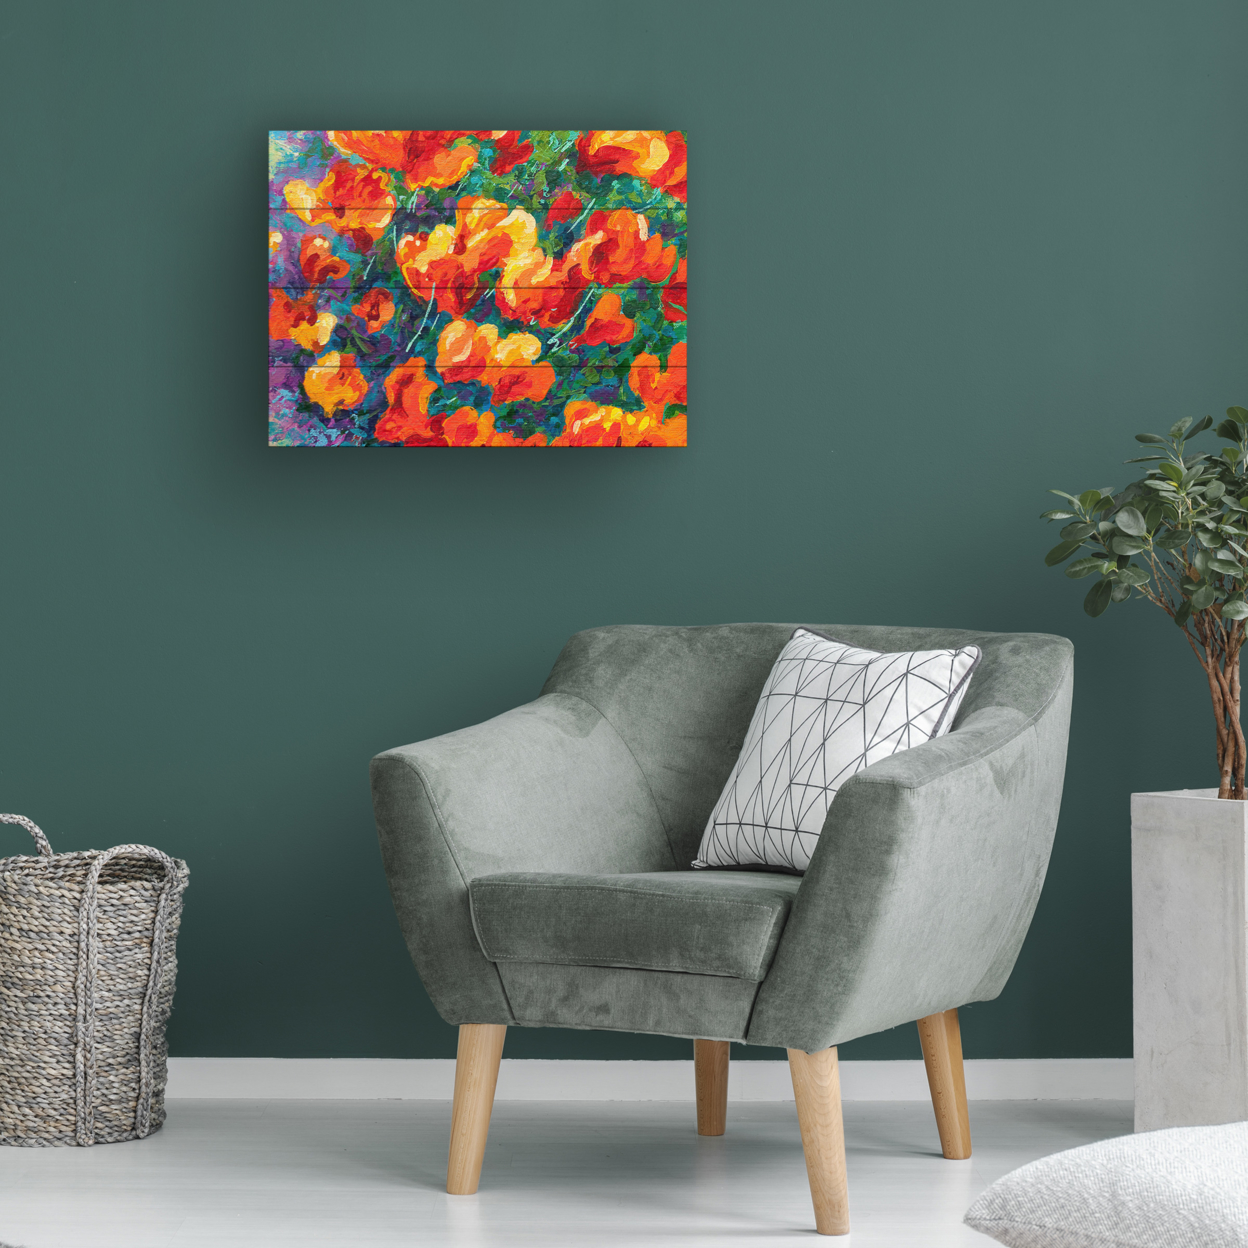 Wall Art 12 X 16 Inches Titled Cal Poppies Ready To Hang Printed On Wooden Planks